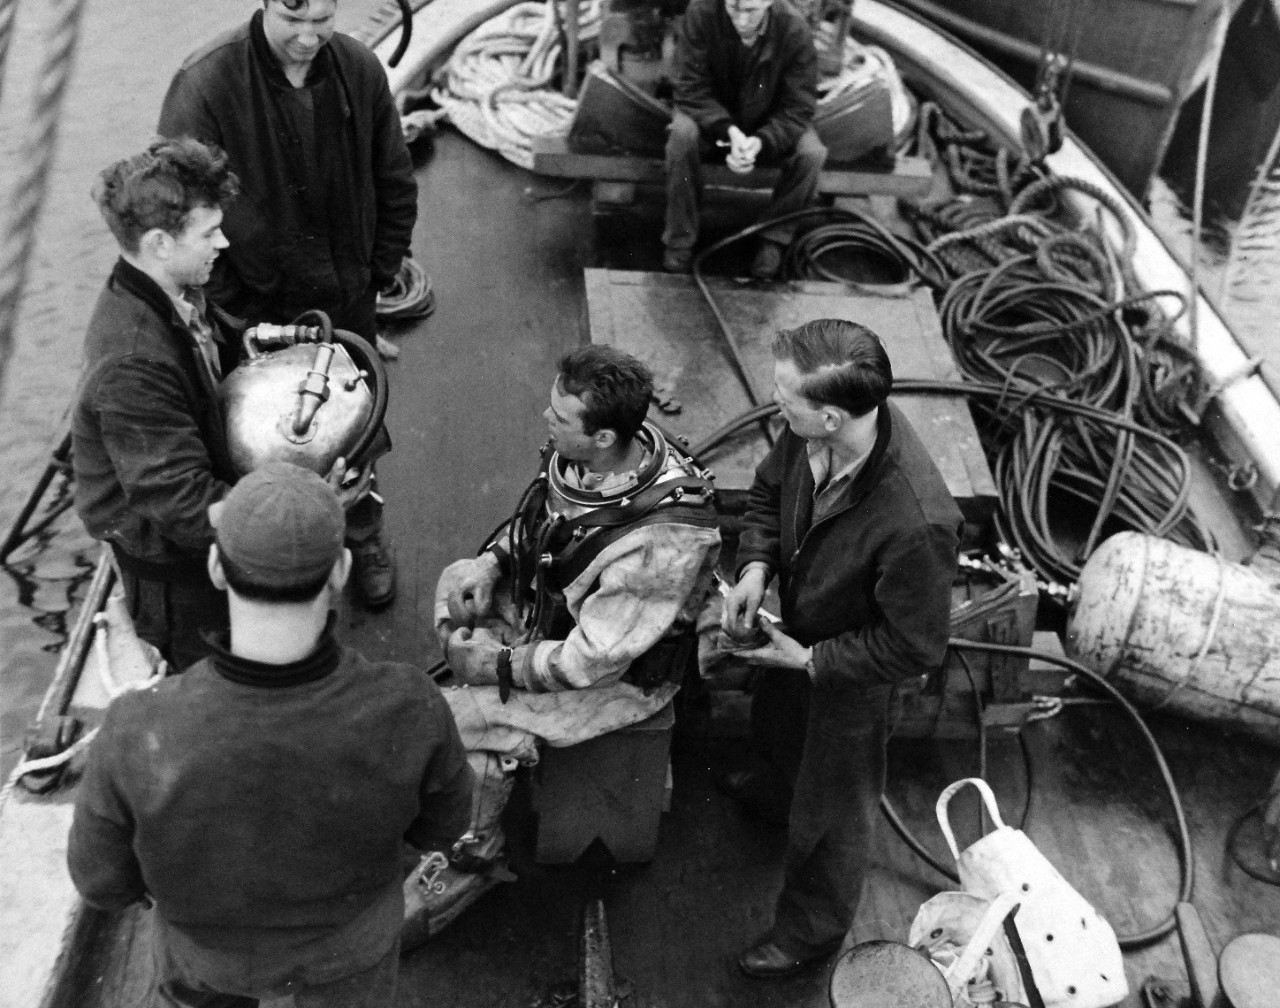 80-G-279823:   Montague Island, Gulf of Alaska, Alaska, 1945.   Salvage diver onboard ship.   Photographed by PhoM3/R.L. Willey, May 30, 1945.  U.S. Navy Photograph now in the collections of the National Archives.  (2016/01/19).